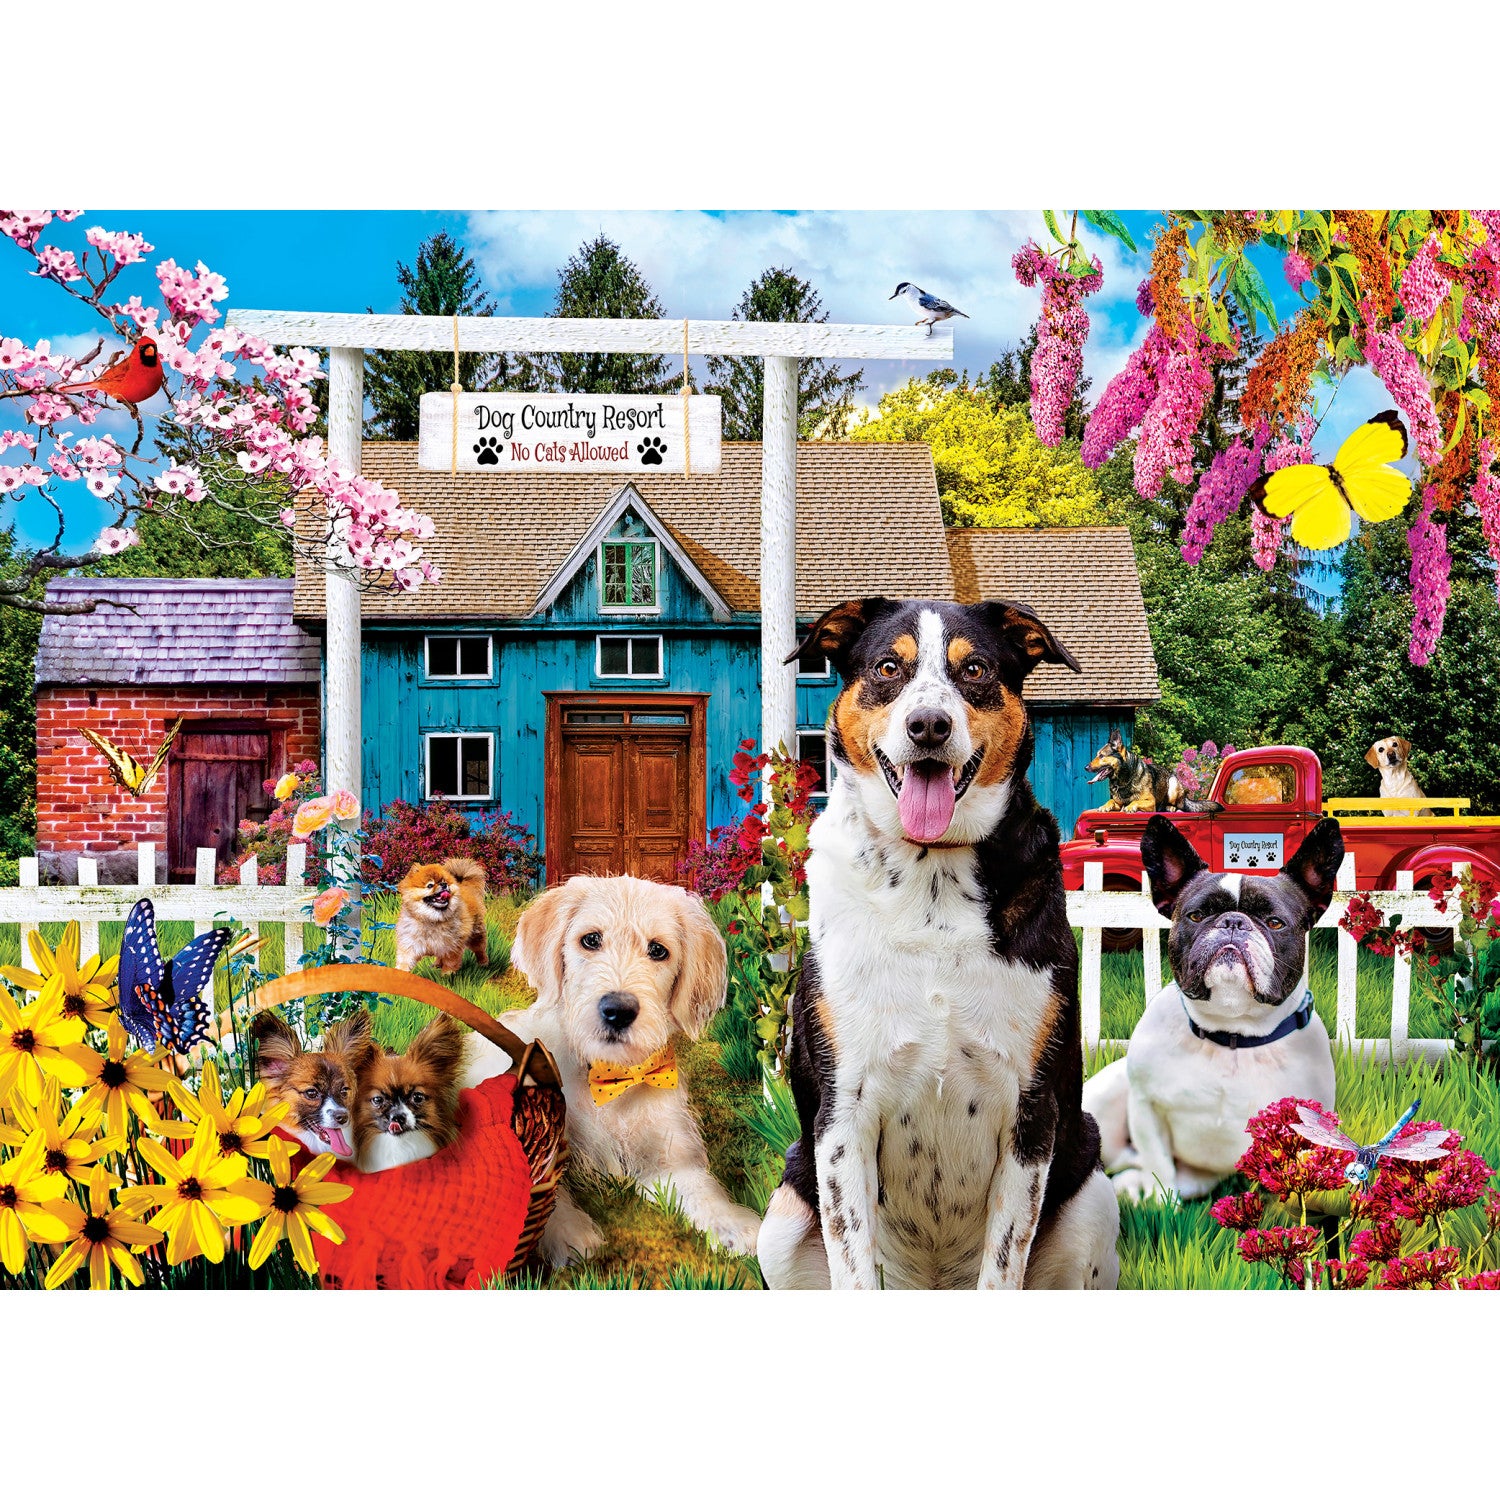 Wild & Whimsical - Dog's Country Resort 1000 Piece Puzzle